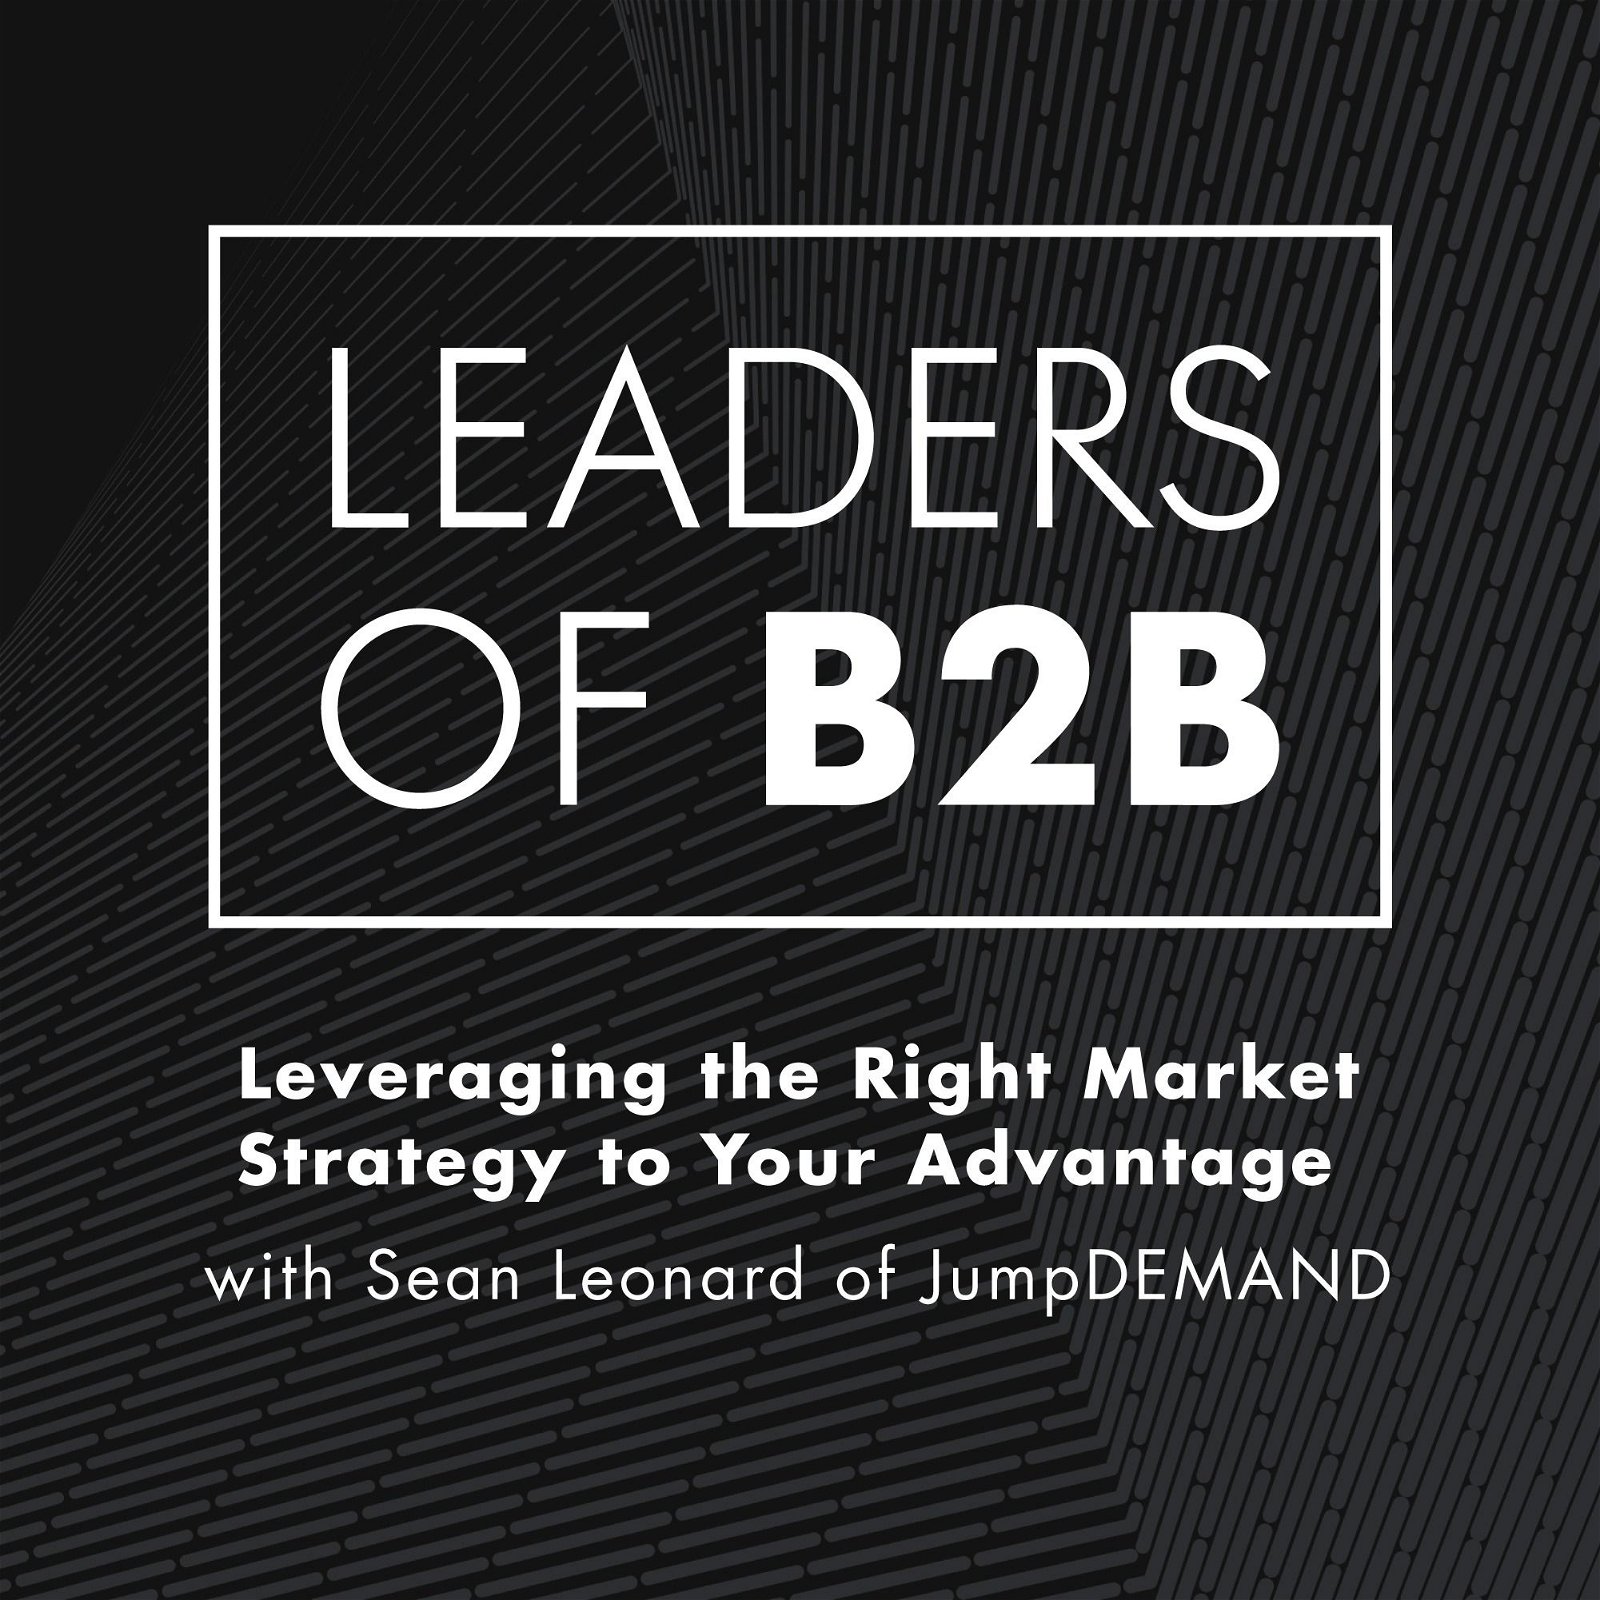 Leveraging the Right Market Strategy to Your Advantage with Sean Leonard of JumpDEMAND